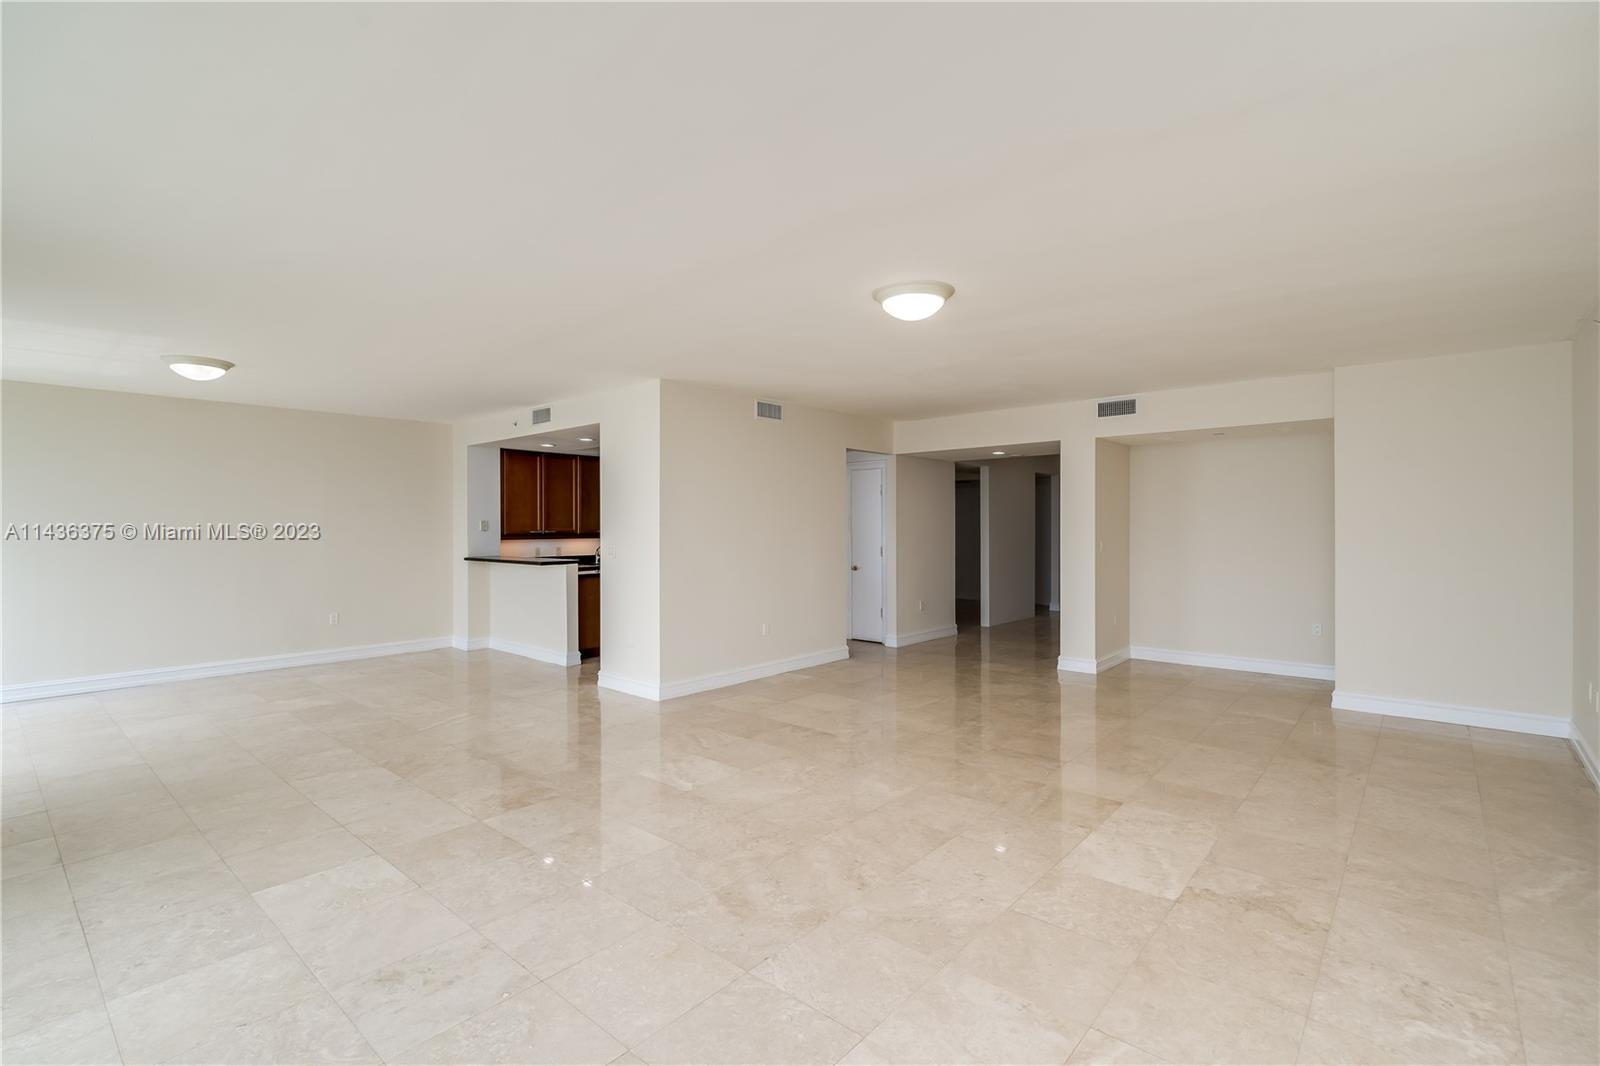 20201 E Country Club Dr Unit 404, Aventura, Florida, 33180, United States, 2 Bedrooms Bedrooms, ,3 BathroomsBathrooms,Residential,For Sale,20201 E Country Club Dr Unit 404,1323203